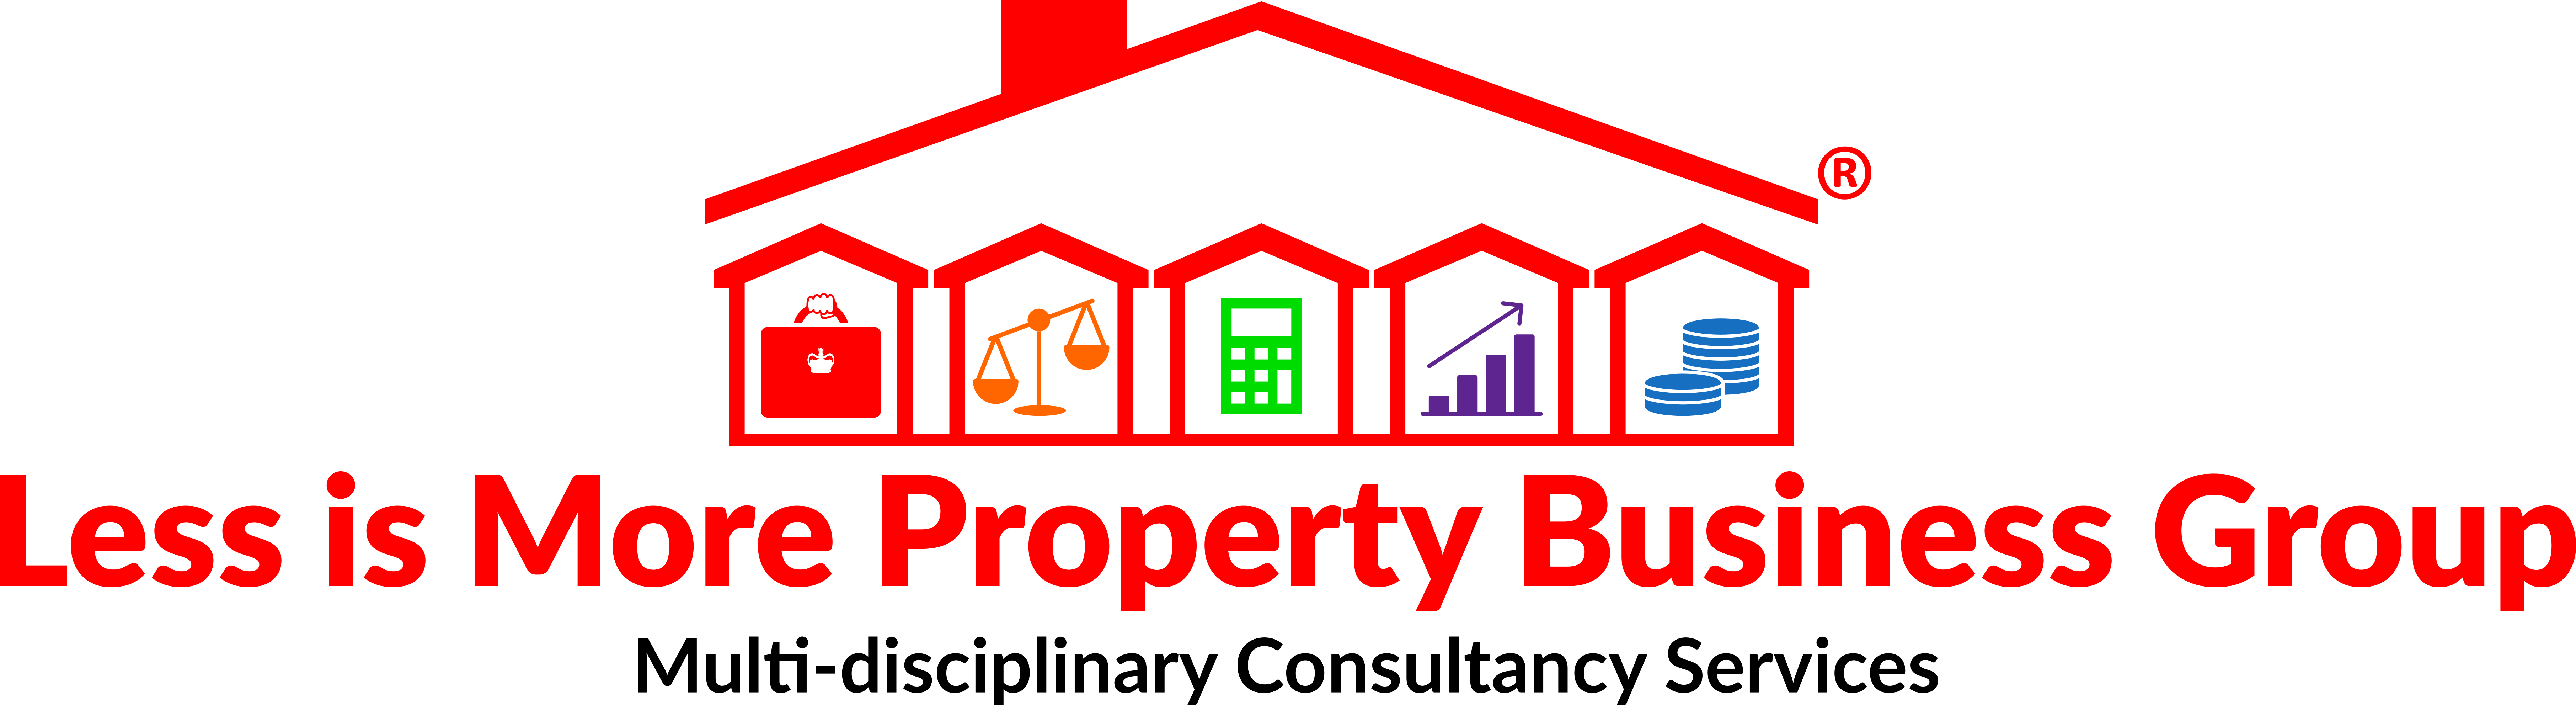 Less is More Property Business Group